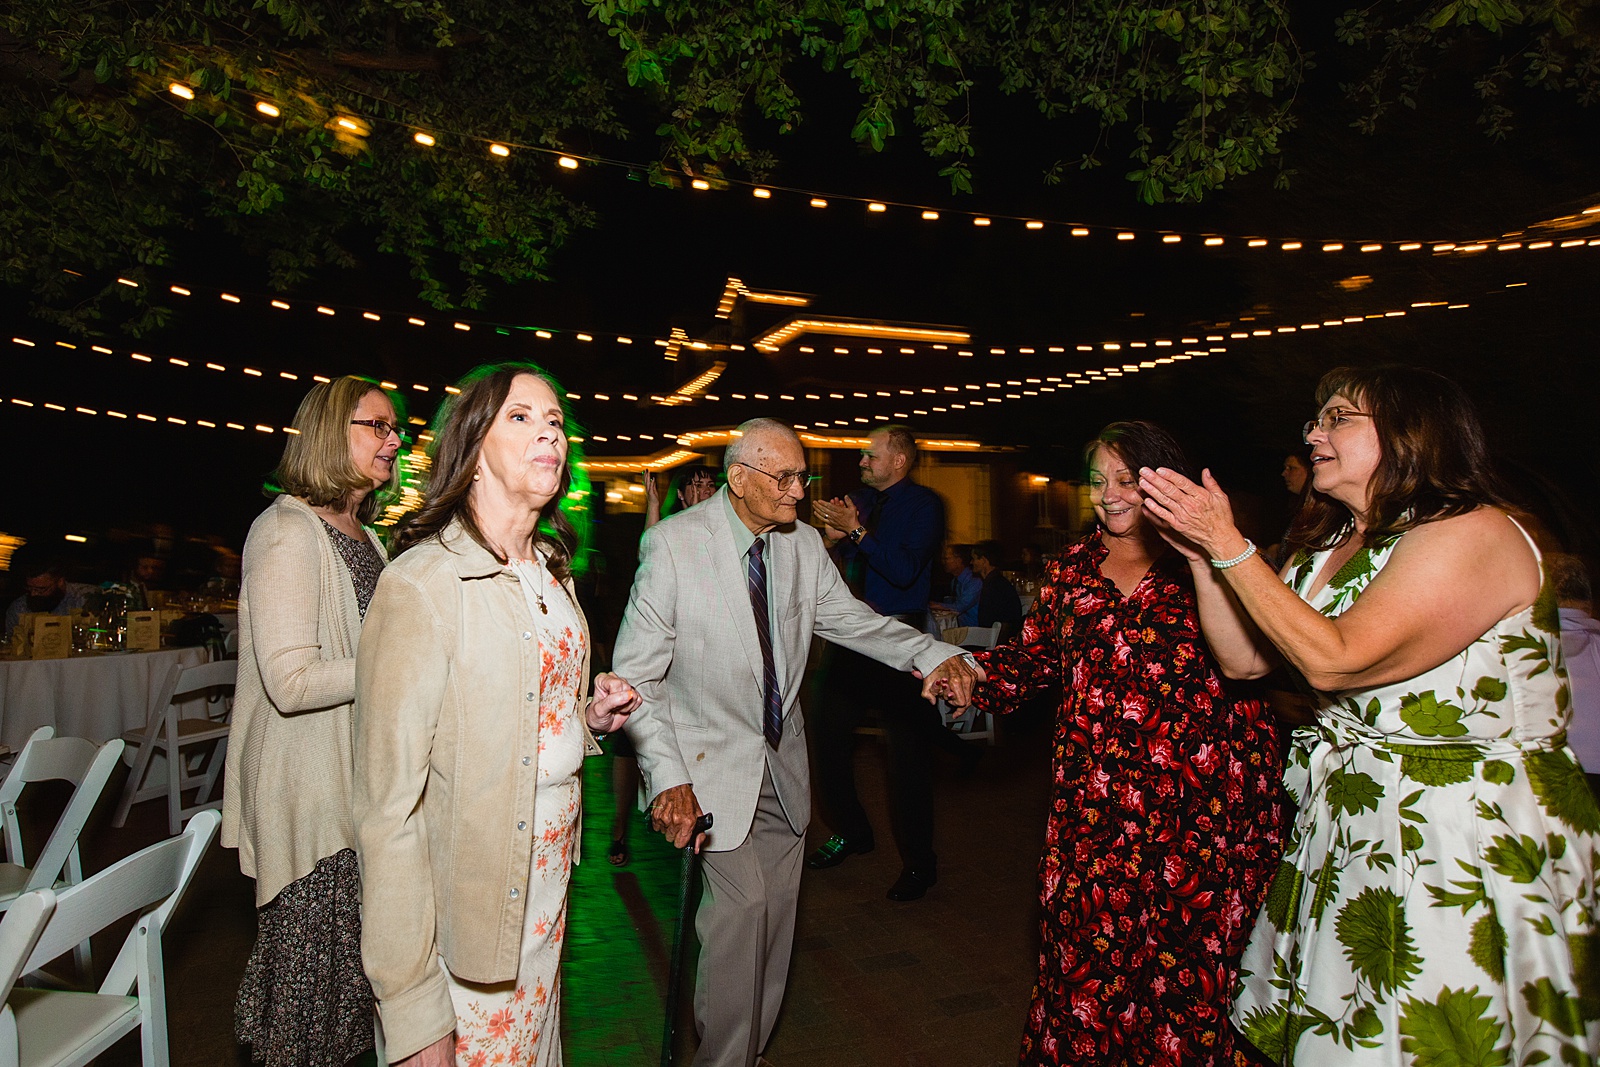 Guests dancing together at Stonebridge Manor wedding reception by Mesa wedding photographer PMA Photography